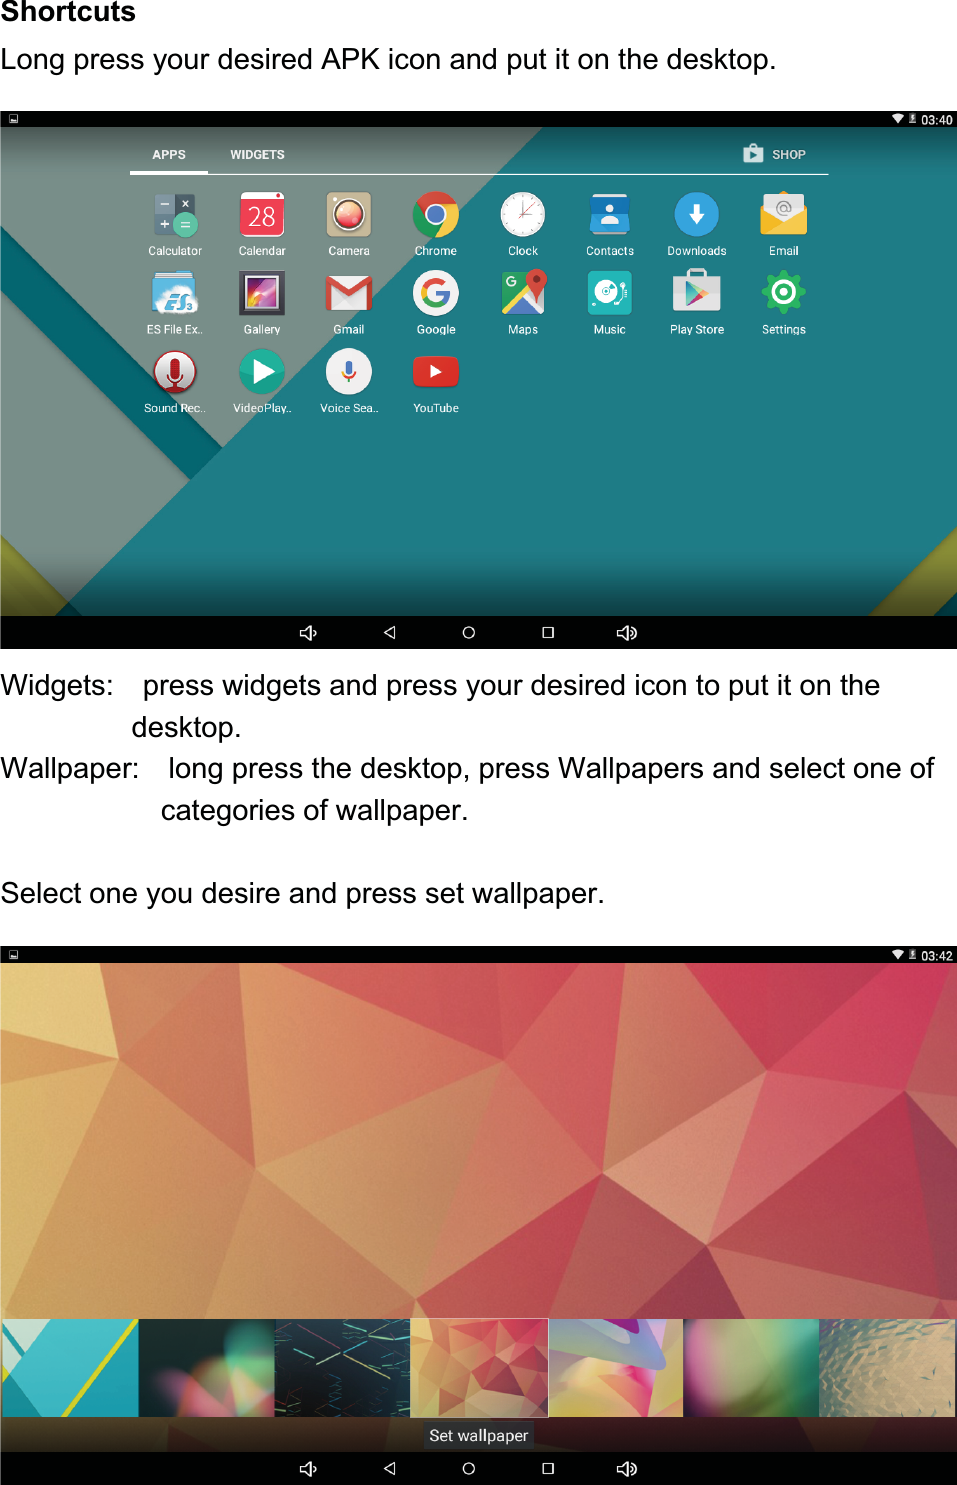 ShortcutsLong press your desired APK icon and put it on the desktop.Widgets: press widgets and press your desired icon to put it on thedesktop.Wallpaper: long press the desktop, press Wallpapers and select one ofcategories of wallpaper.Select one you desire and press set wallpaper.